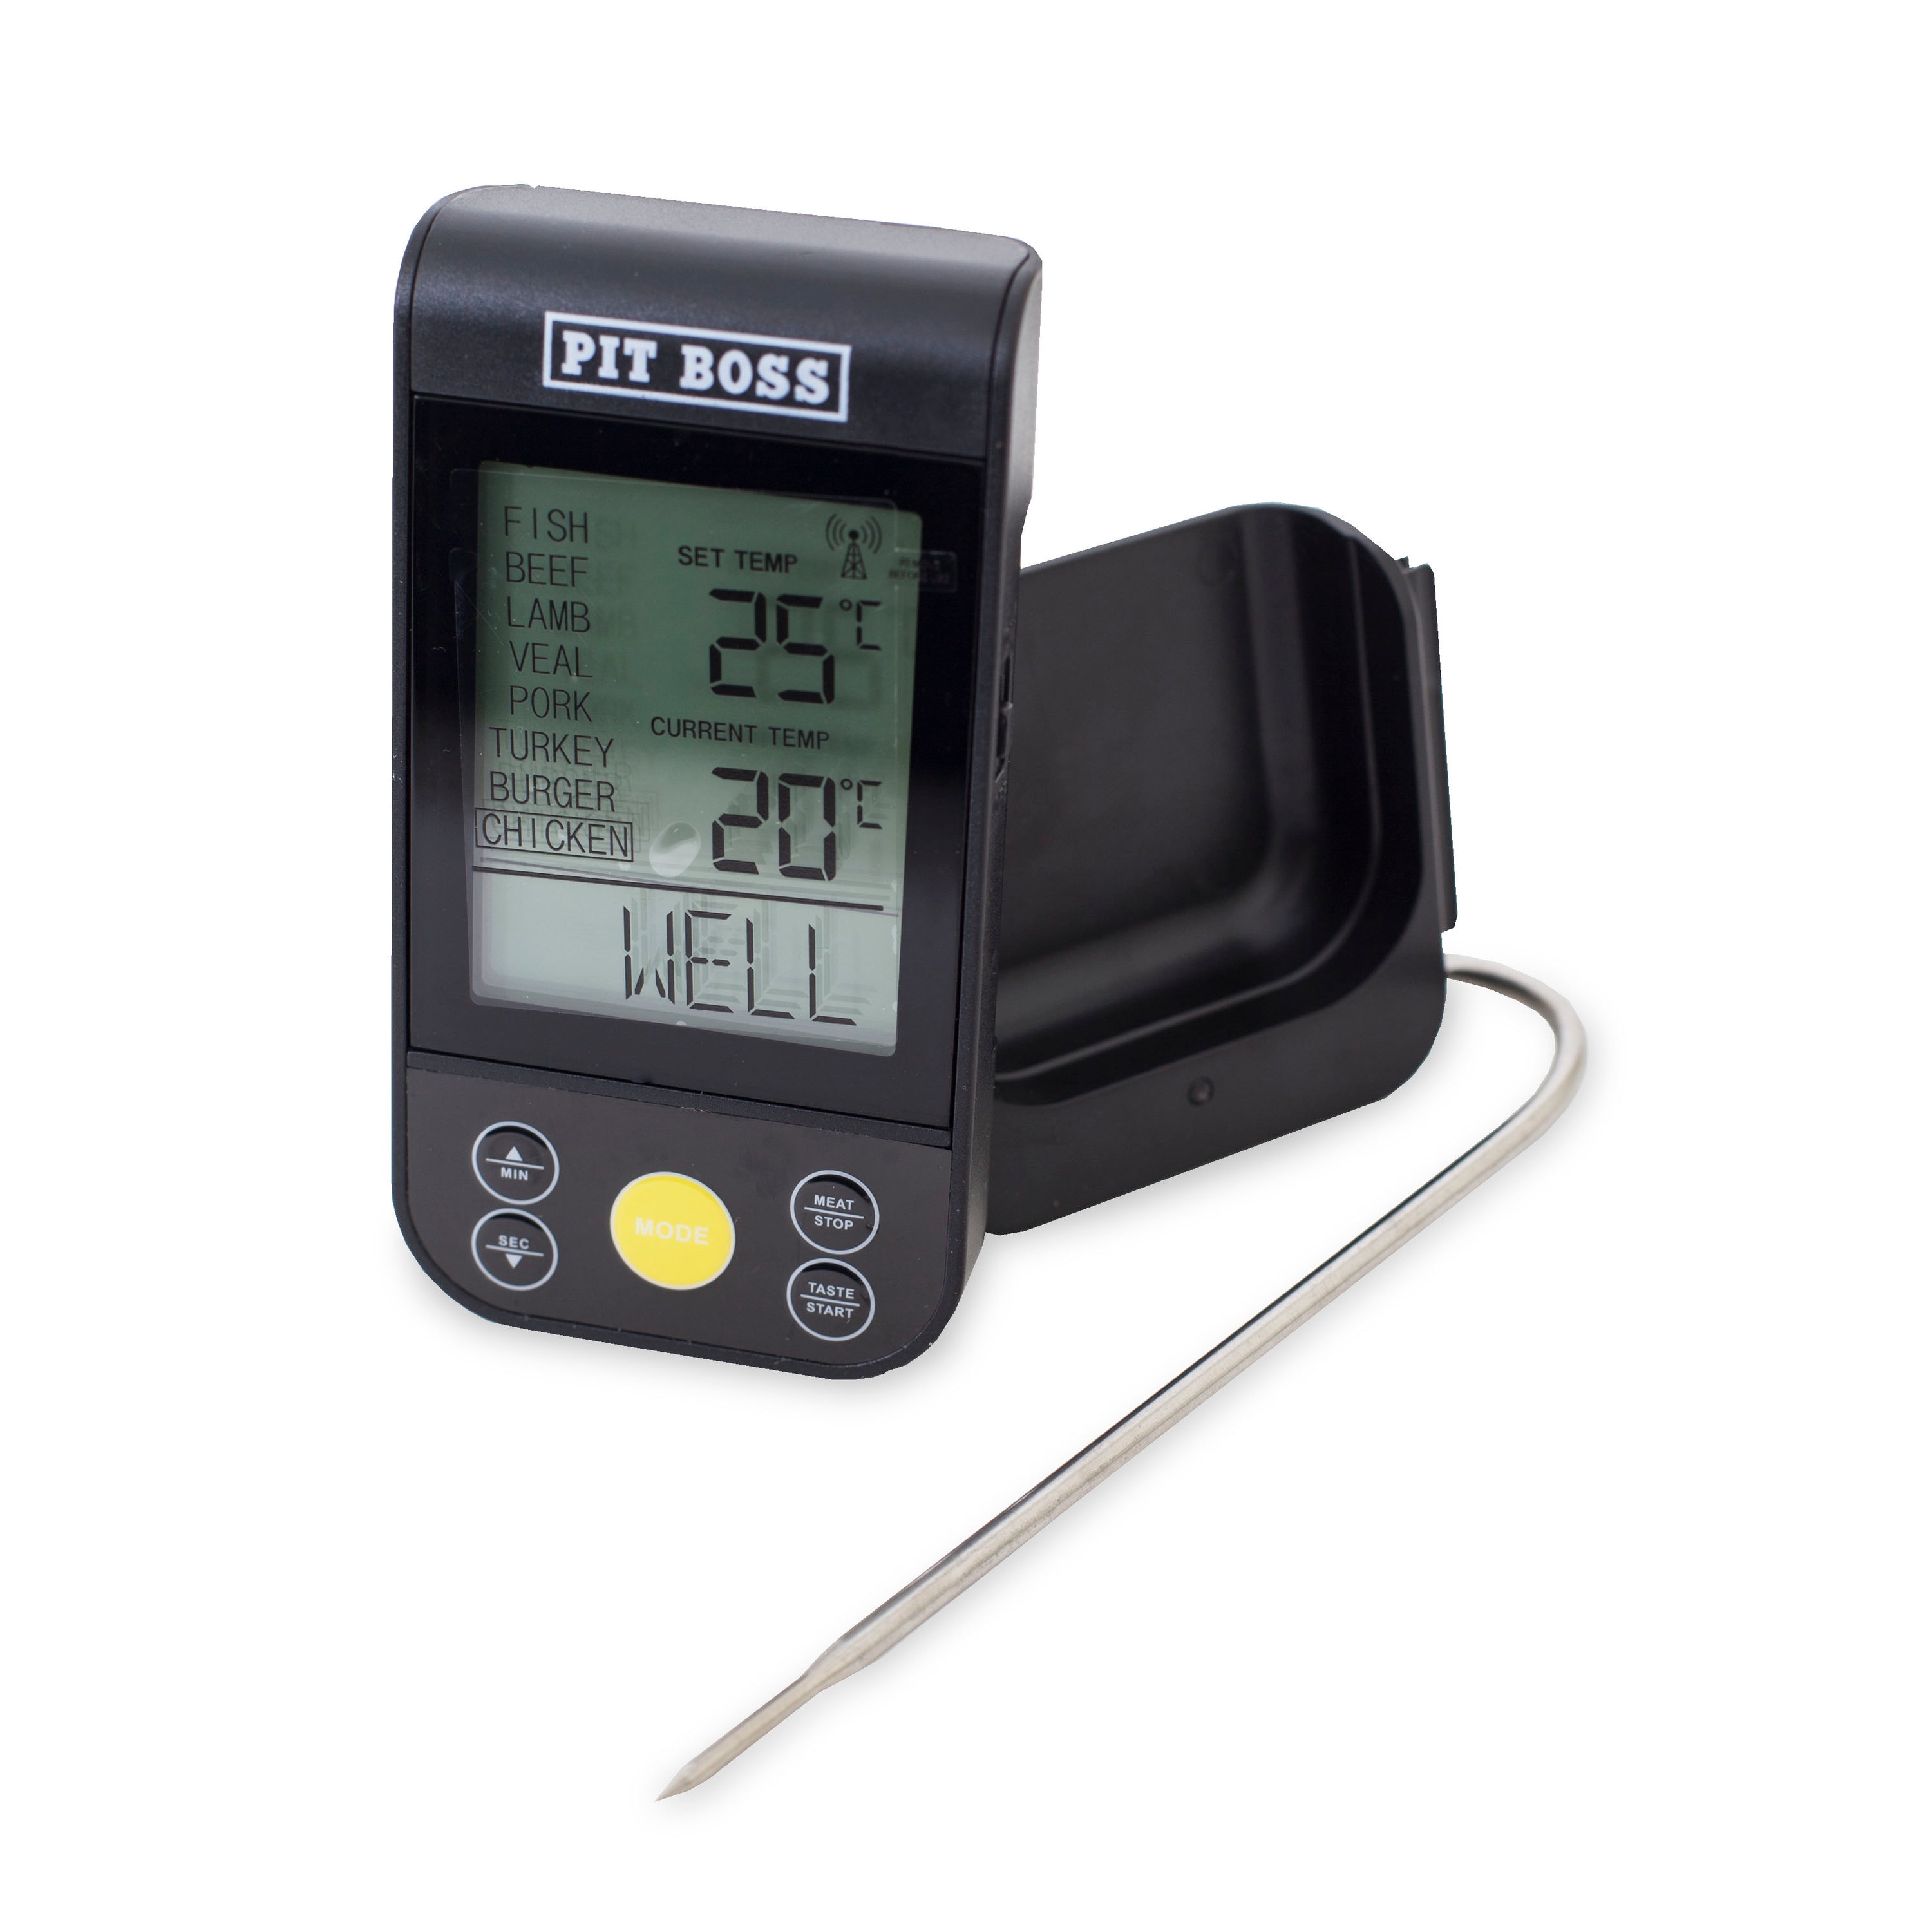 Replacement Black Dome Thermometer for Pit Boss 2-Series / 3-Series Vertical Smoker Grills, Pit Boss Memphis Ultimate Thermometer,Pit Boss PB1230G